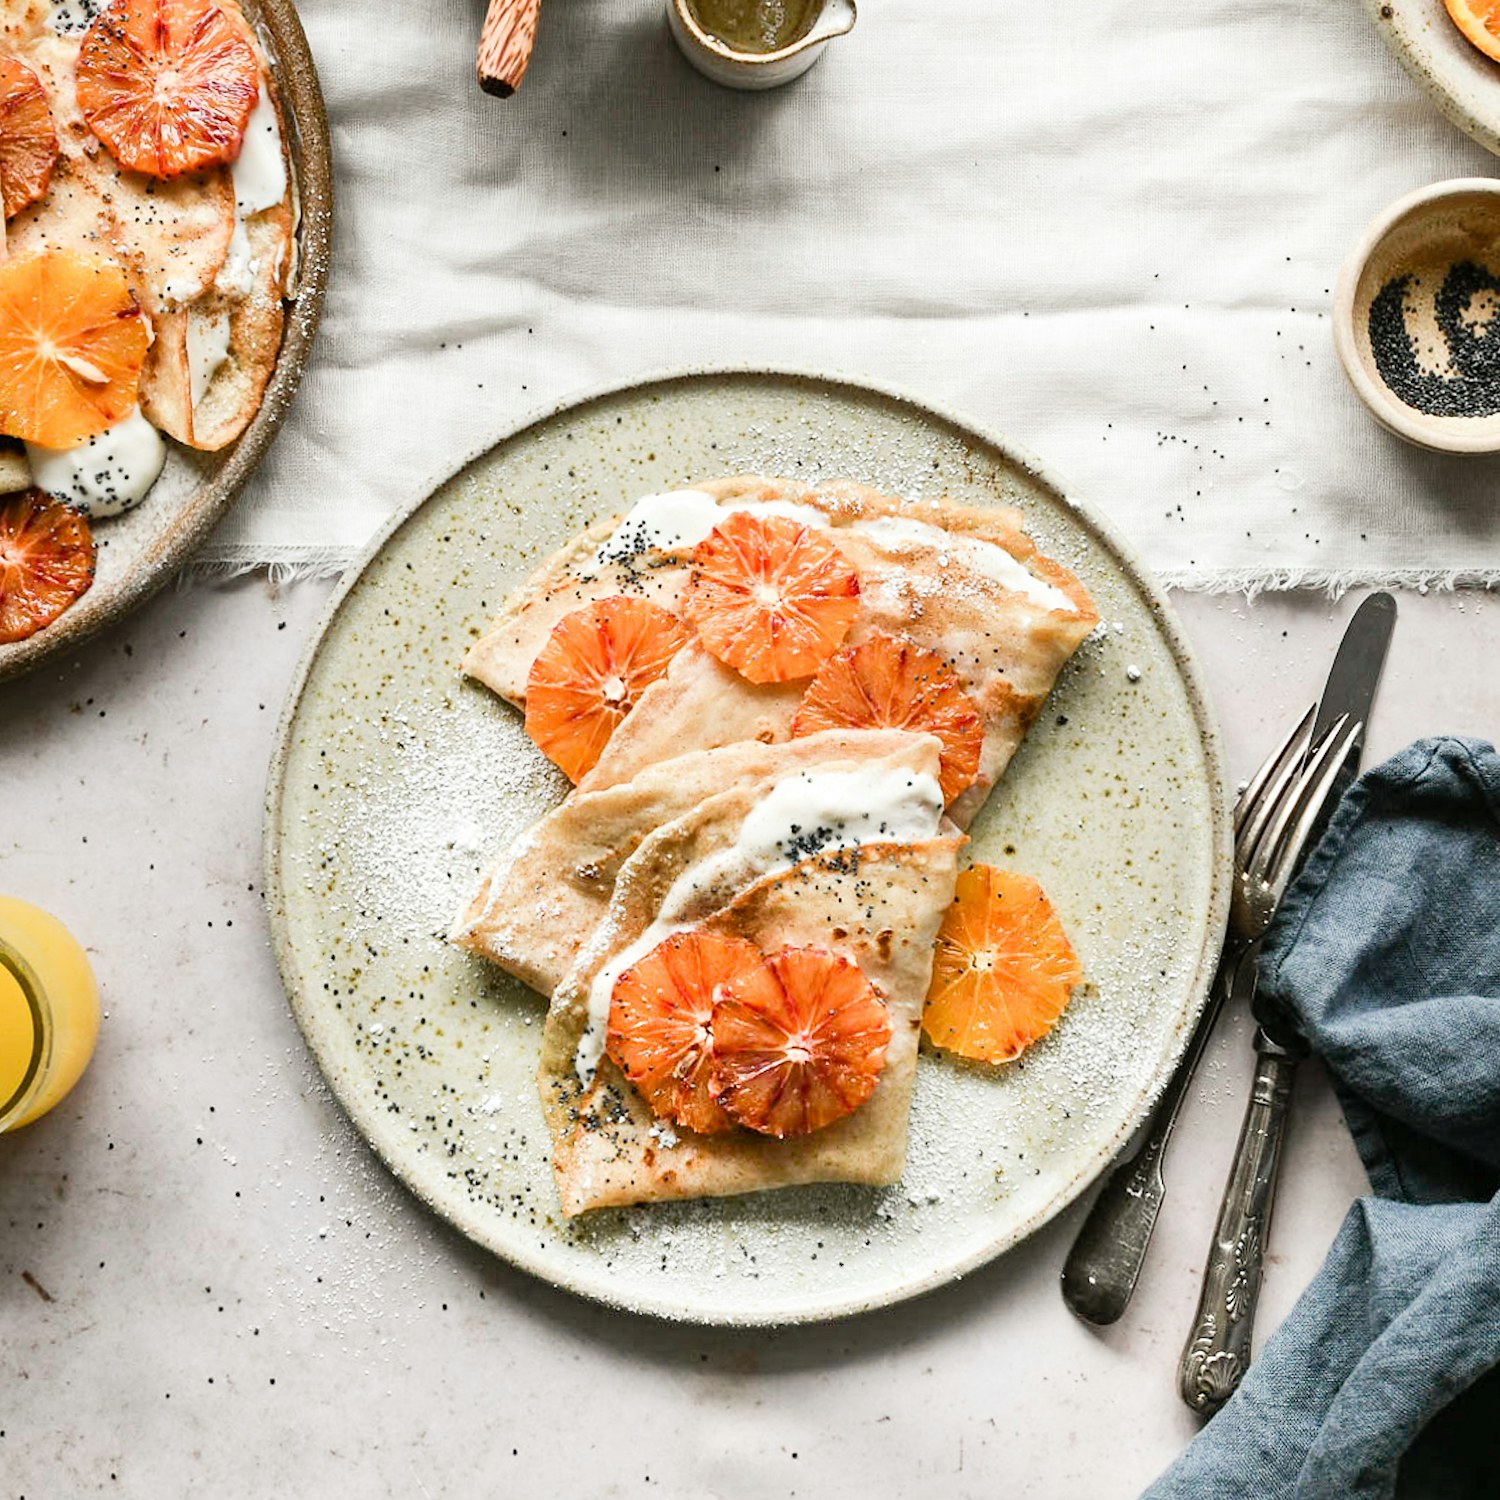 French Cr﻿﻿﻿﻿êpes with Blood Orange & Poppy Seeds